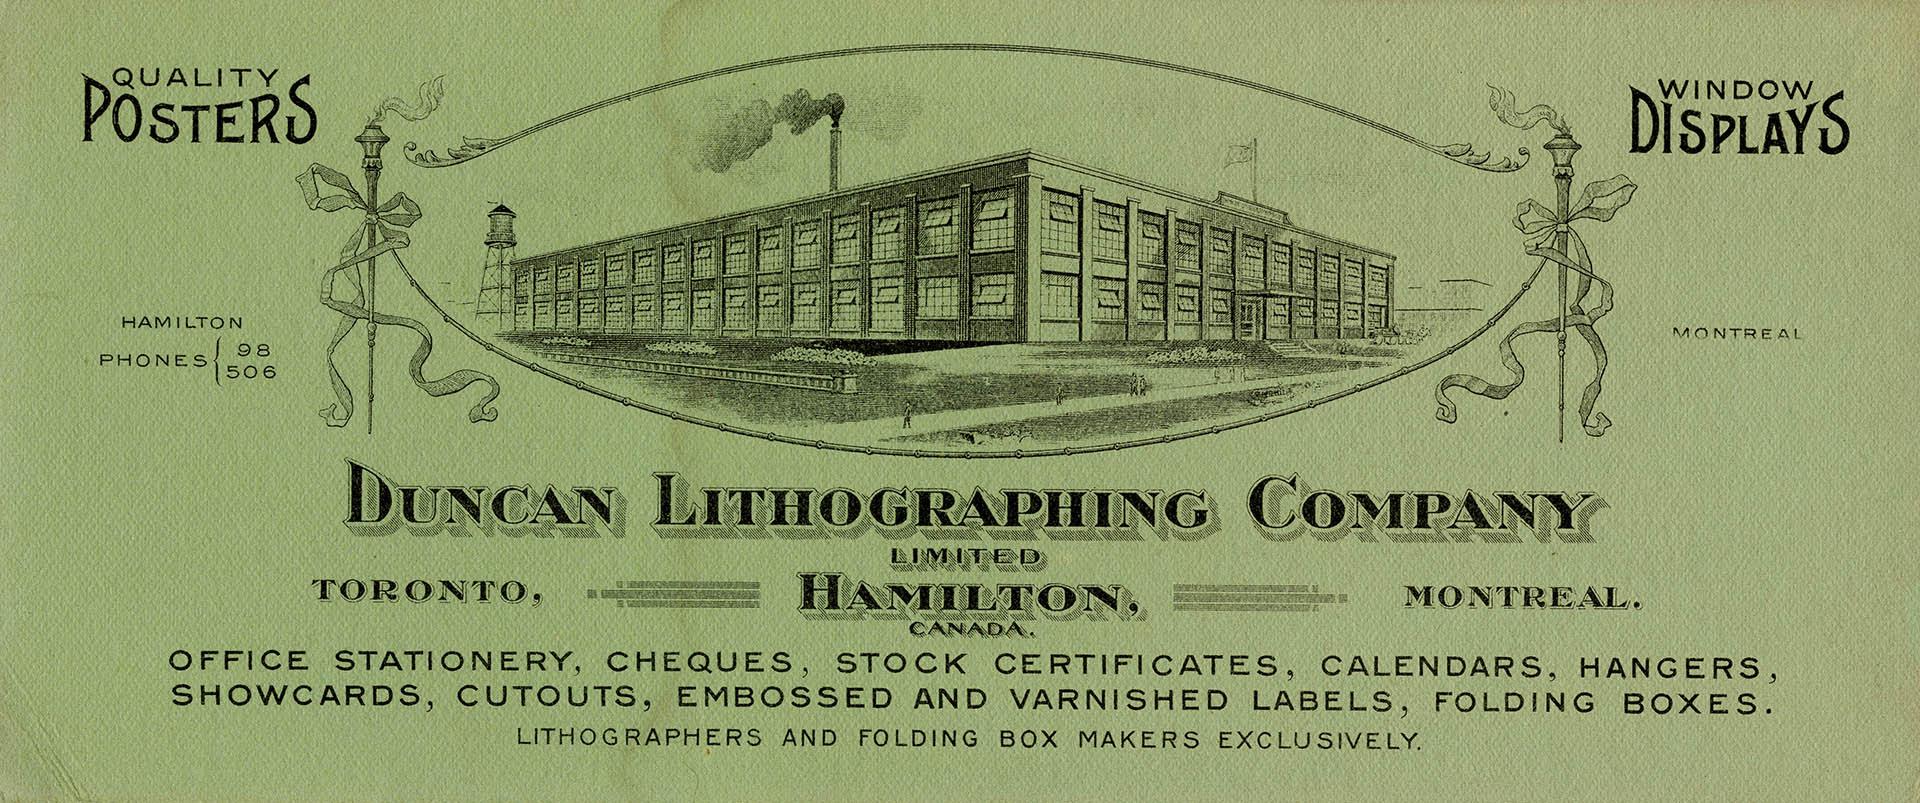 Duncan Lithographing Company advertising blotter